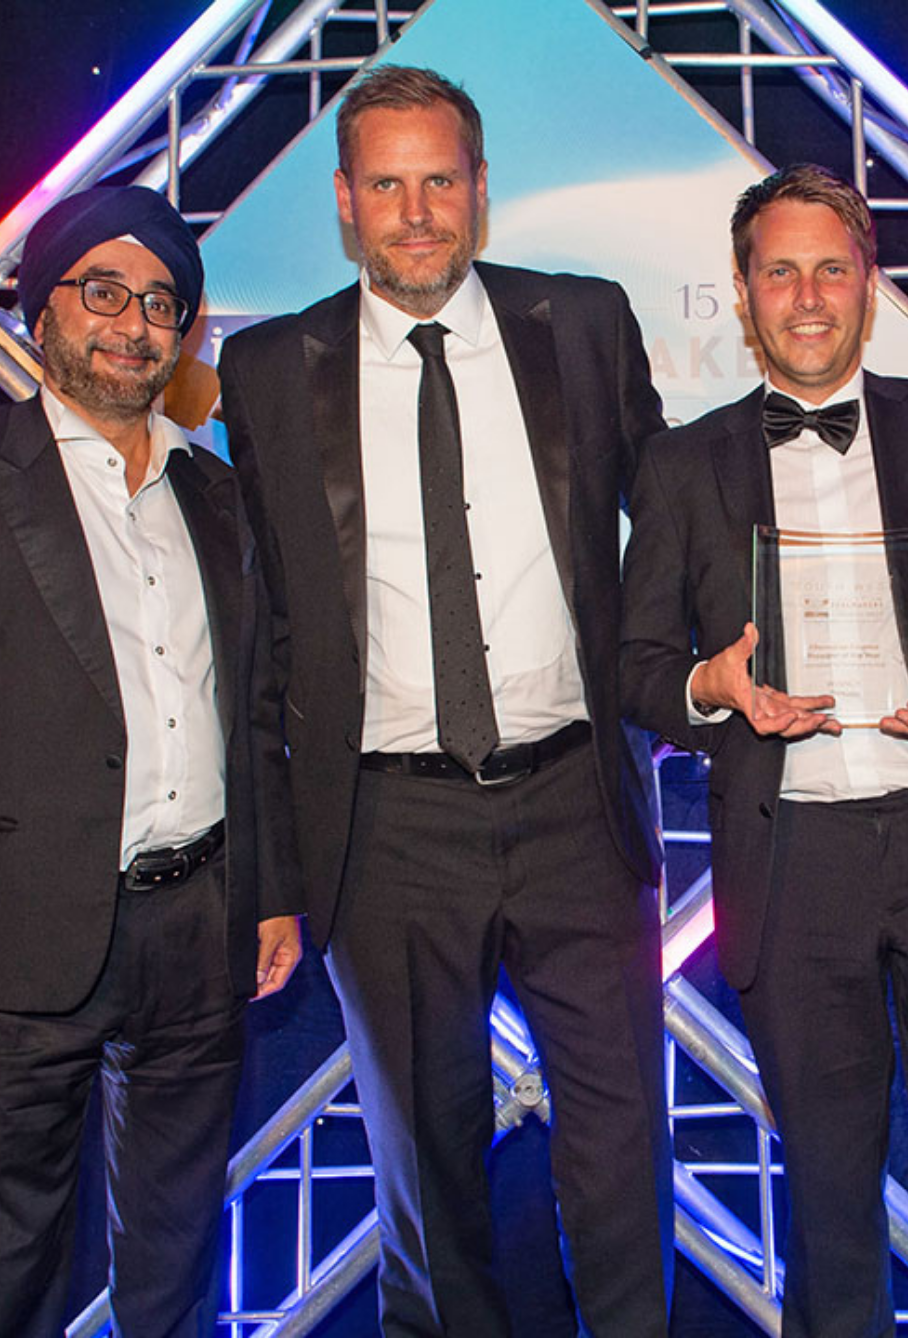 ThinCats named Alternative Finance Provider of the year for South West